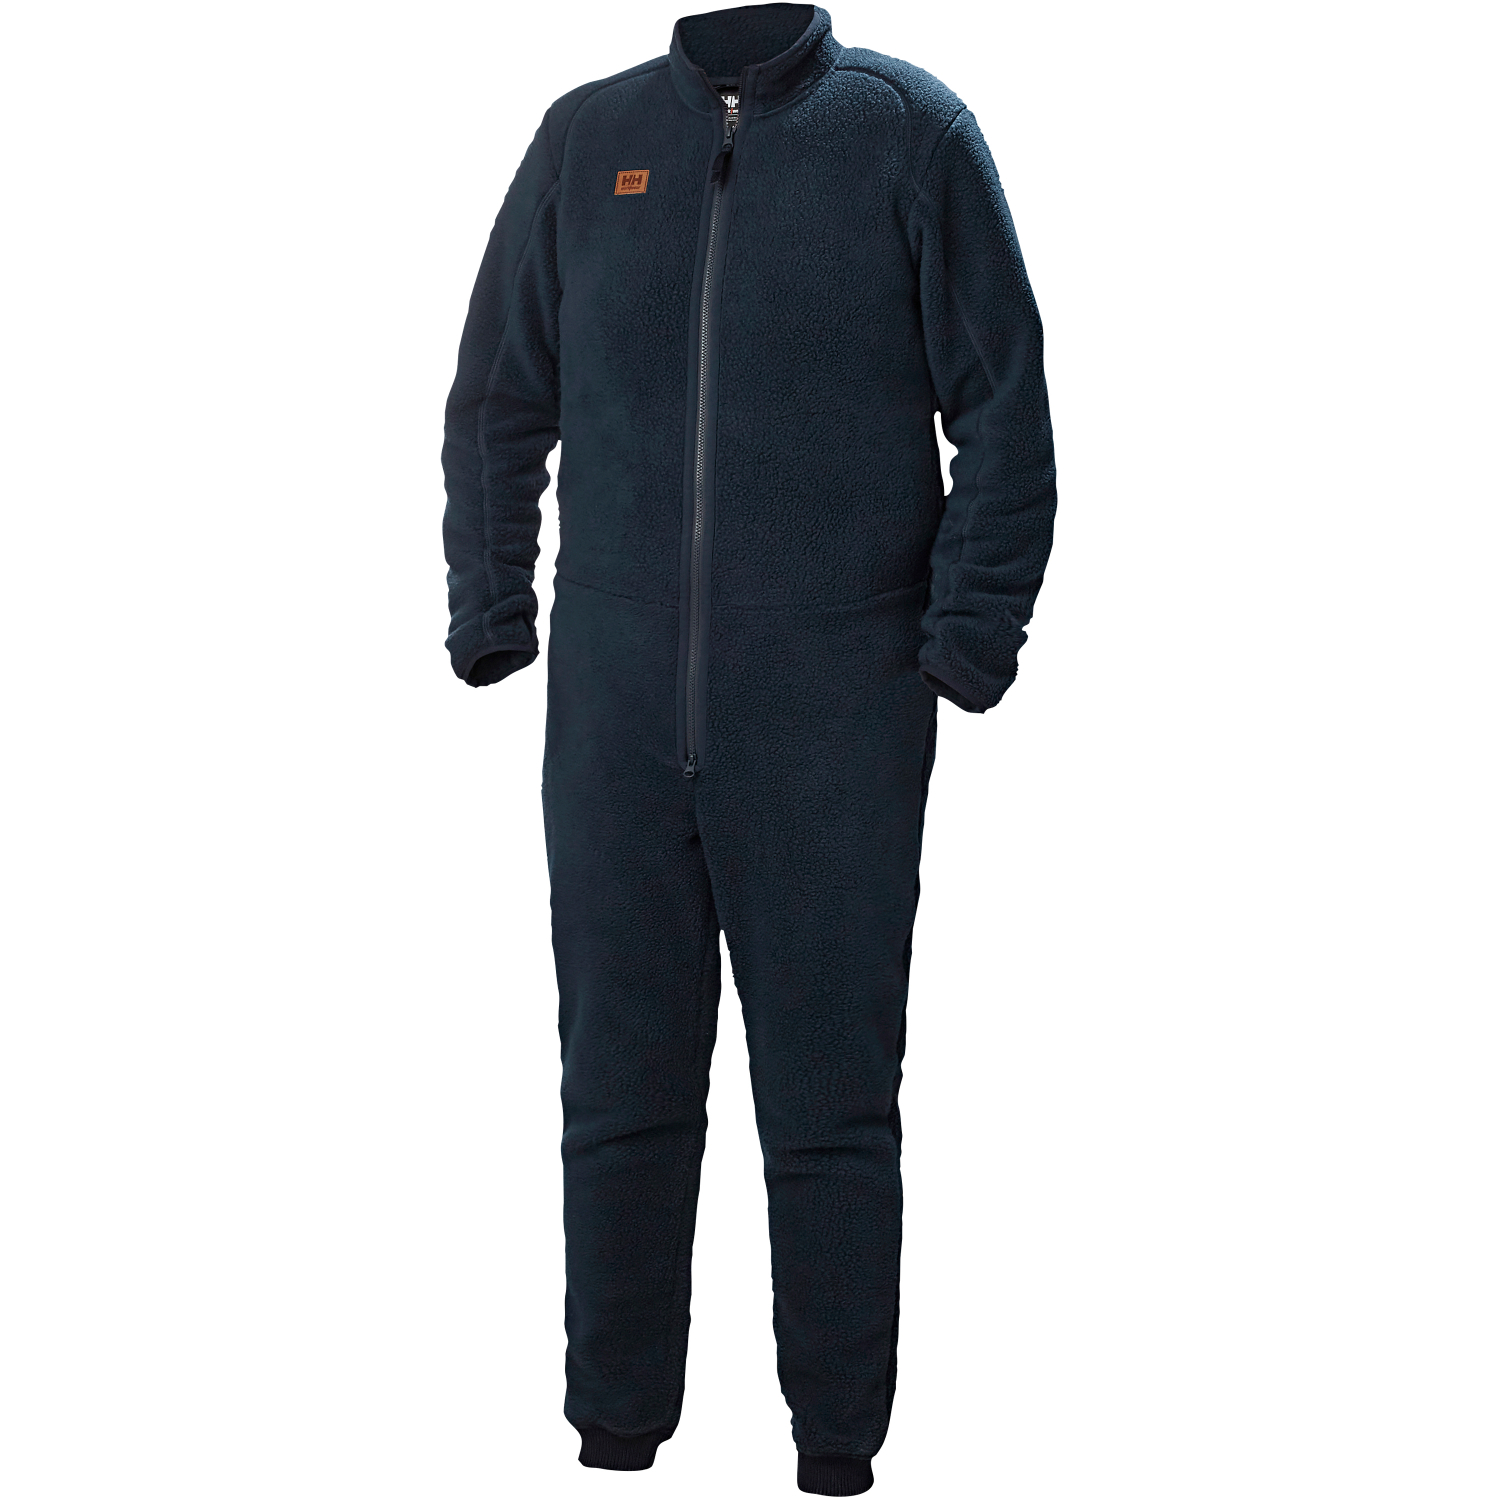 Helly Hansen Mens One piece suit Heritage Pile at low prices